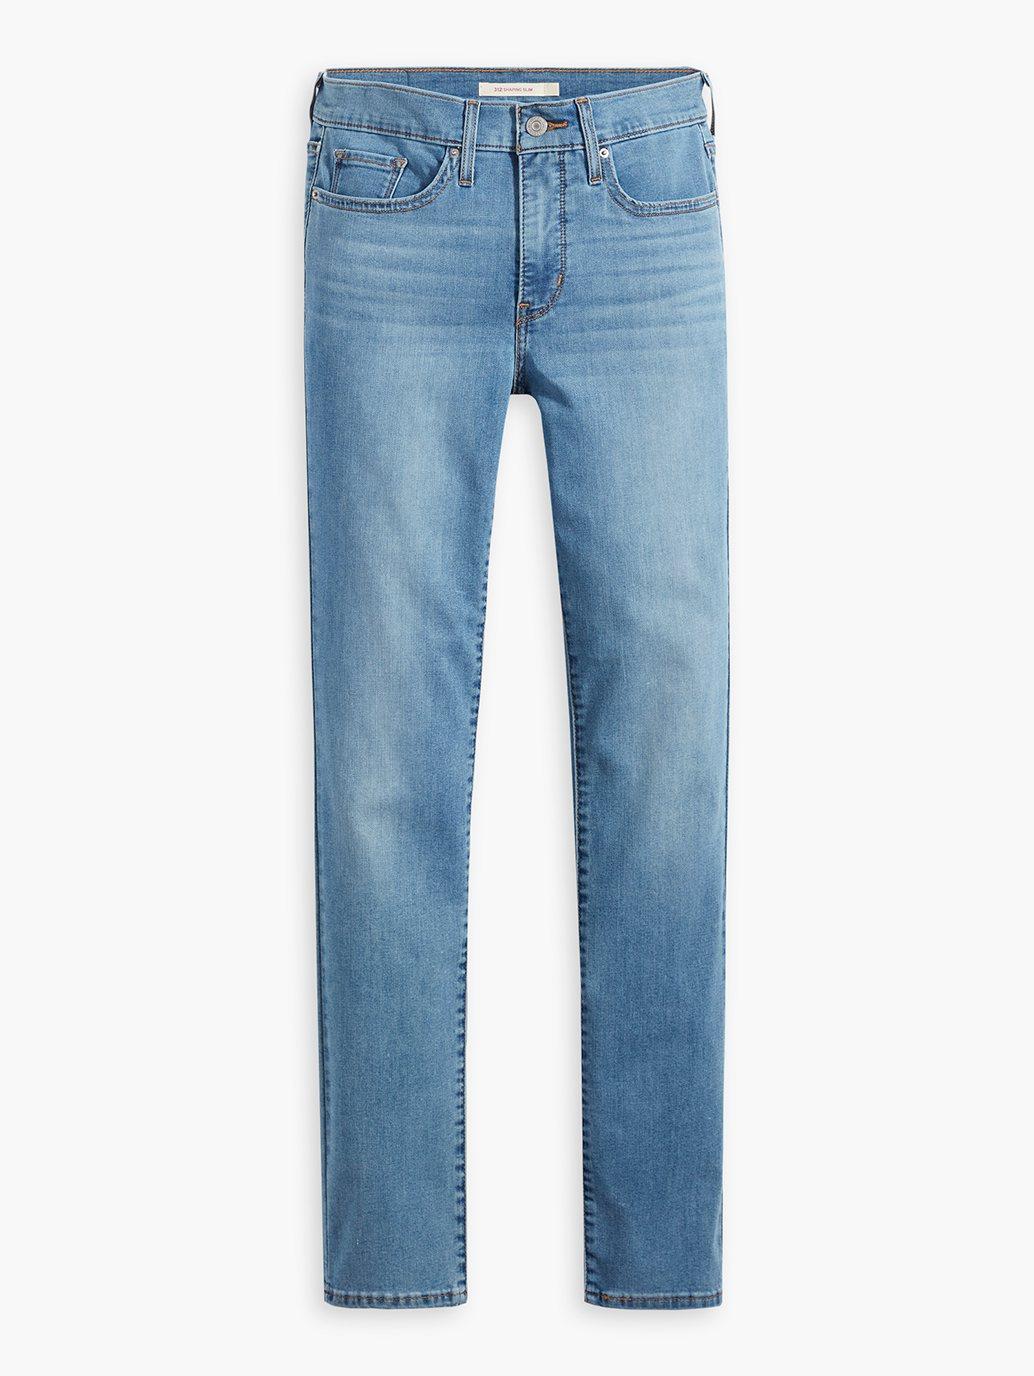 Buy Levi's® Women's 312 Shaping Slim Fit Jeans | Levi's® Official Online  Store MY